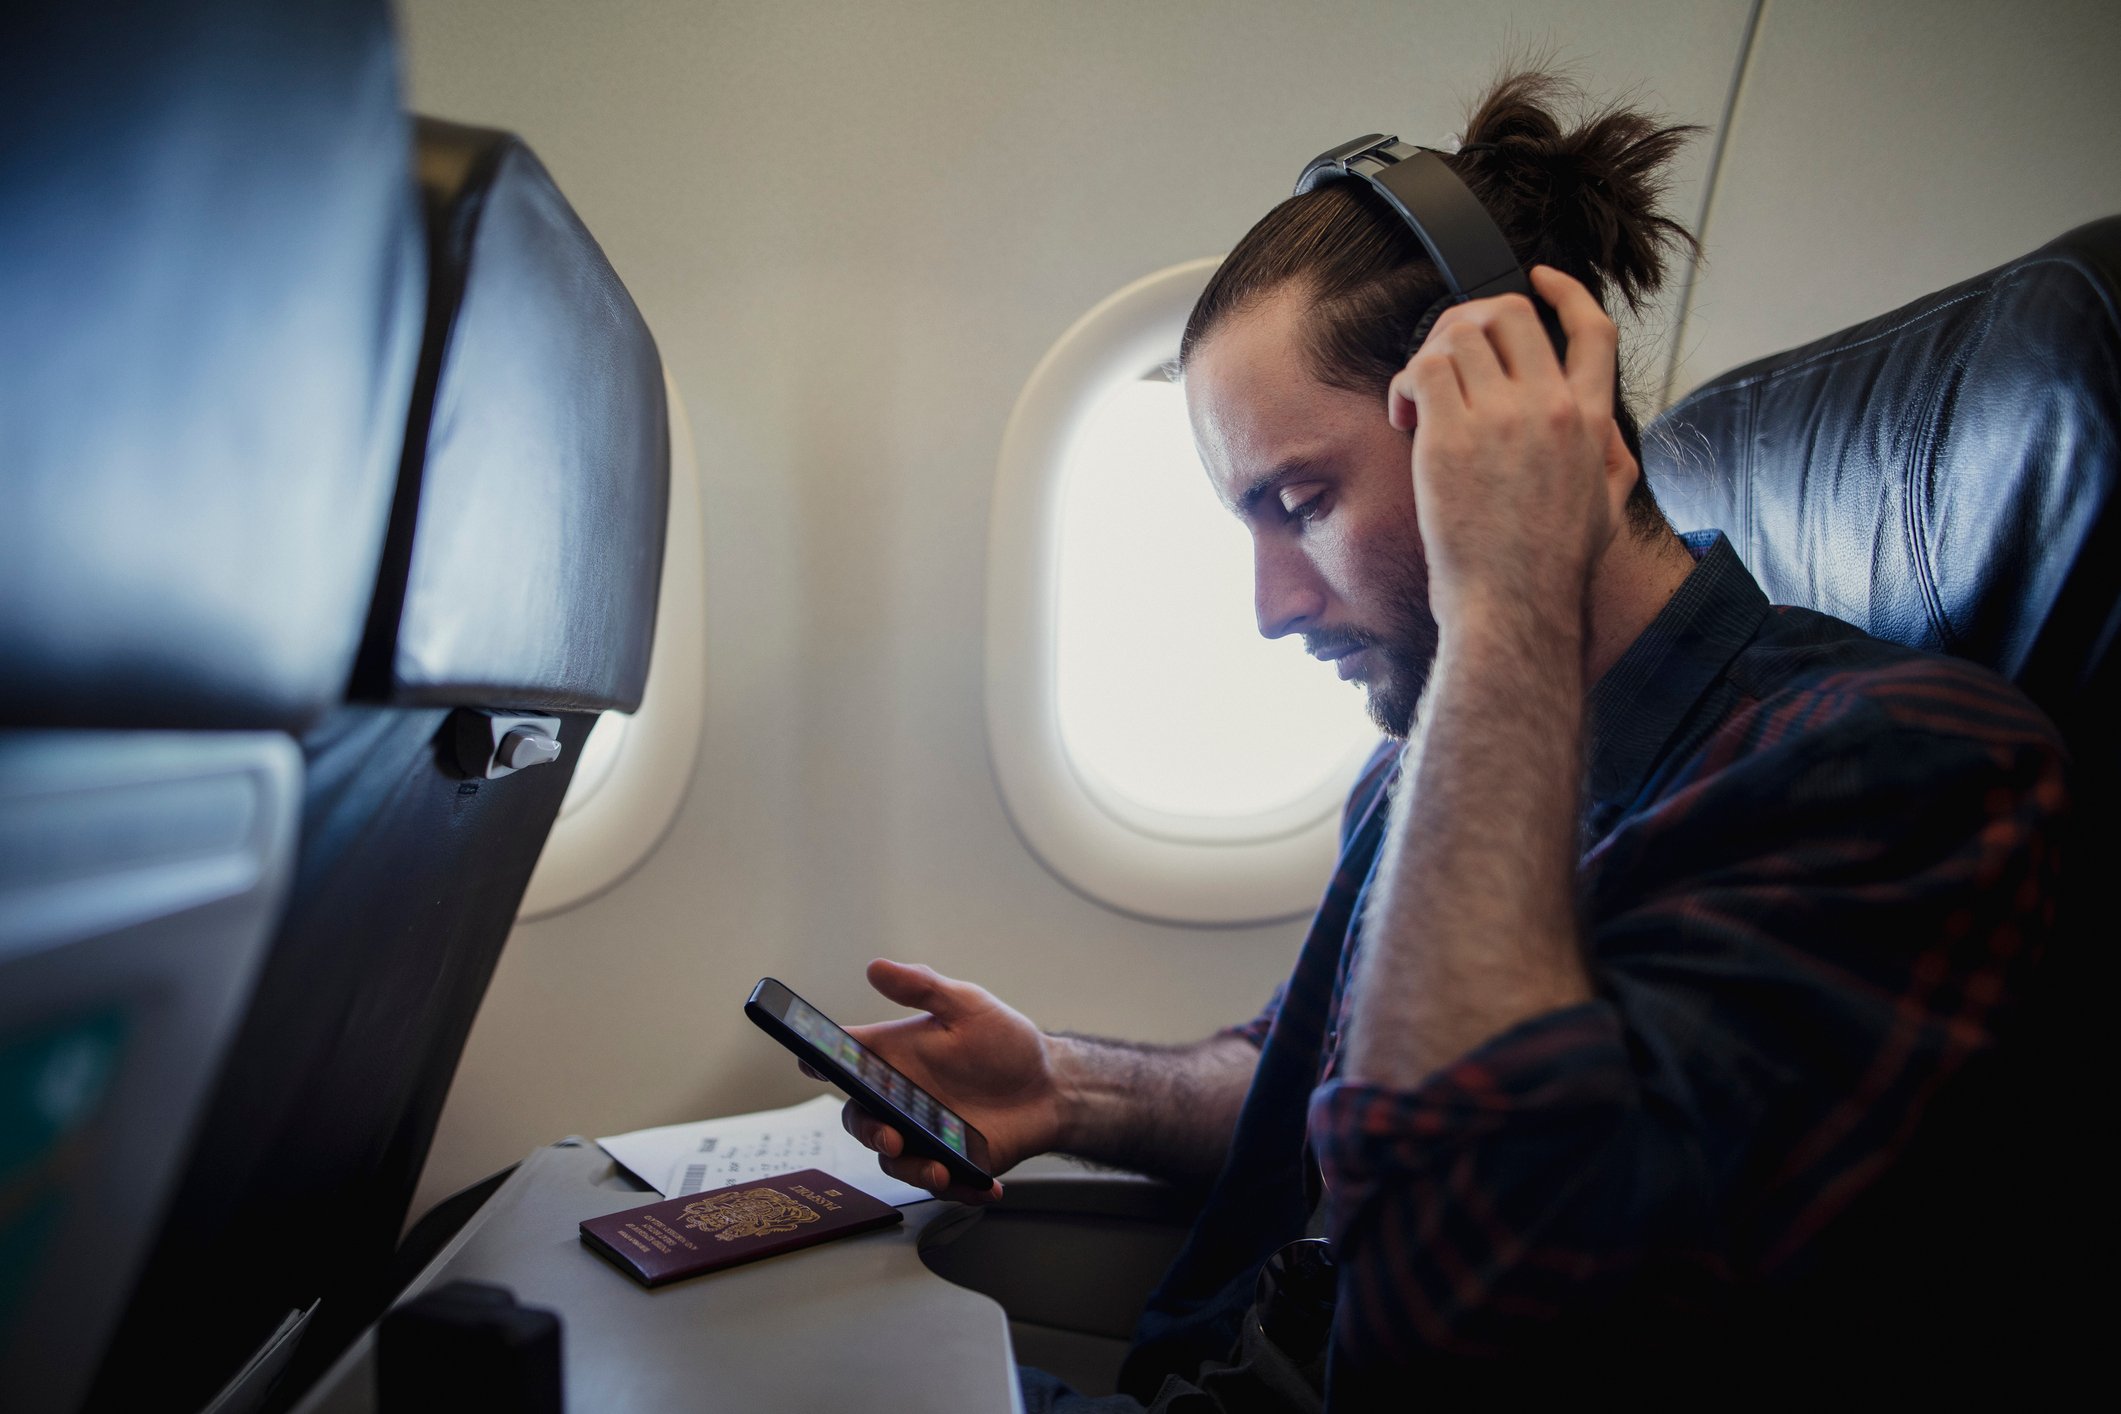 Encouraging Biblical Scriptures to Fight Travel Anxiety